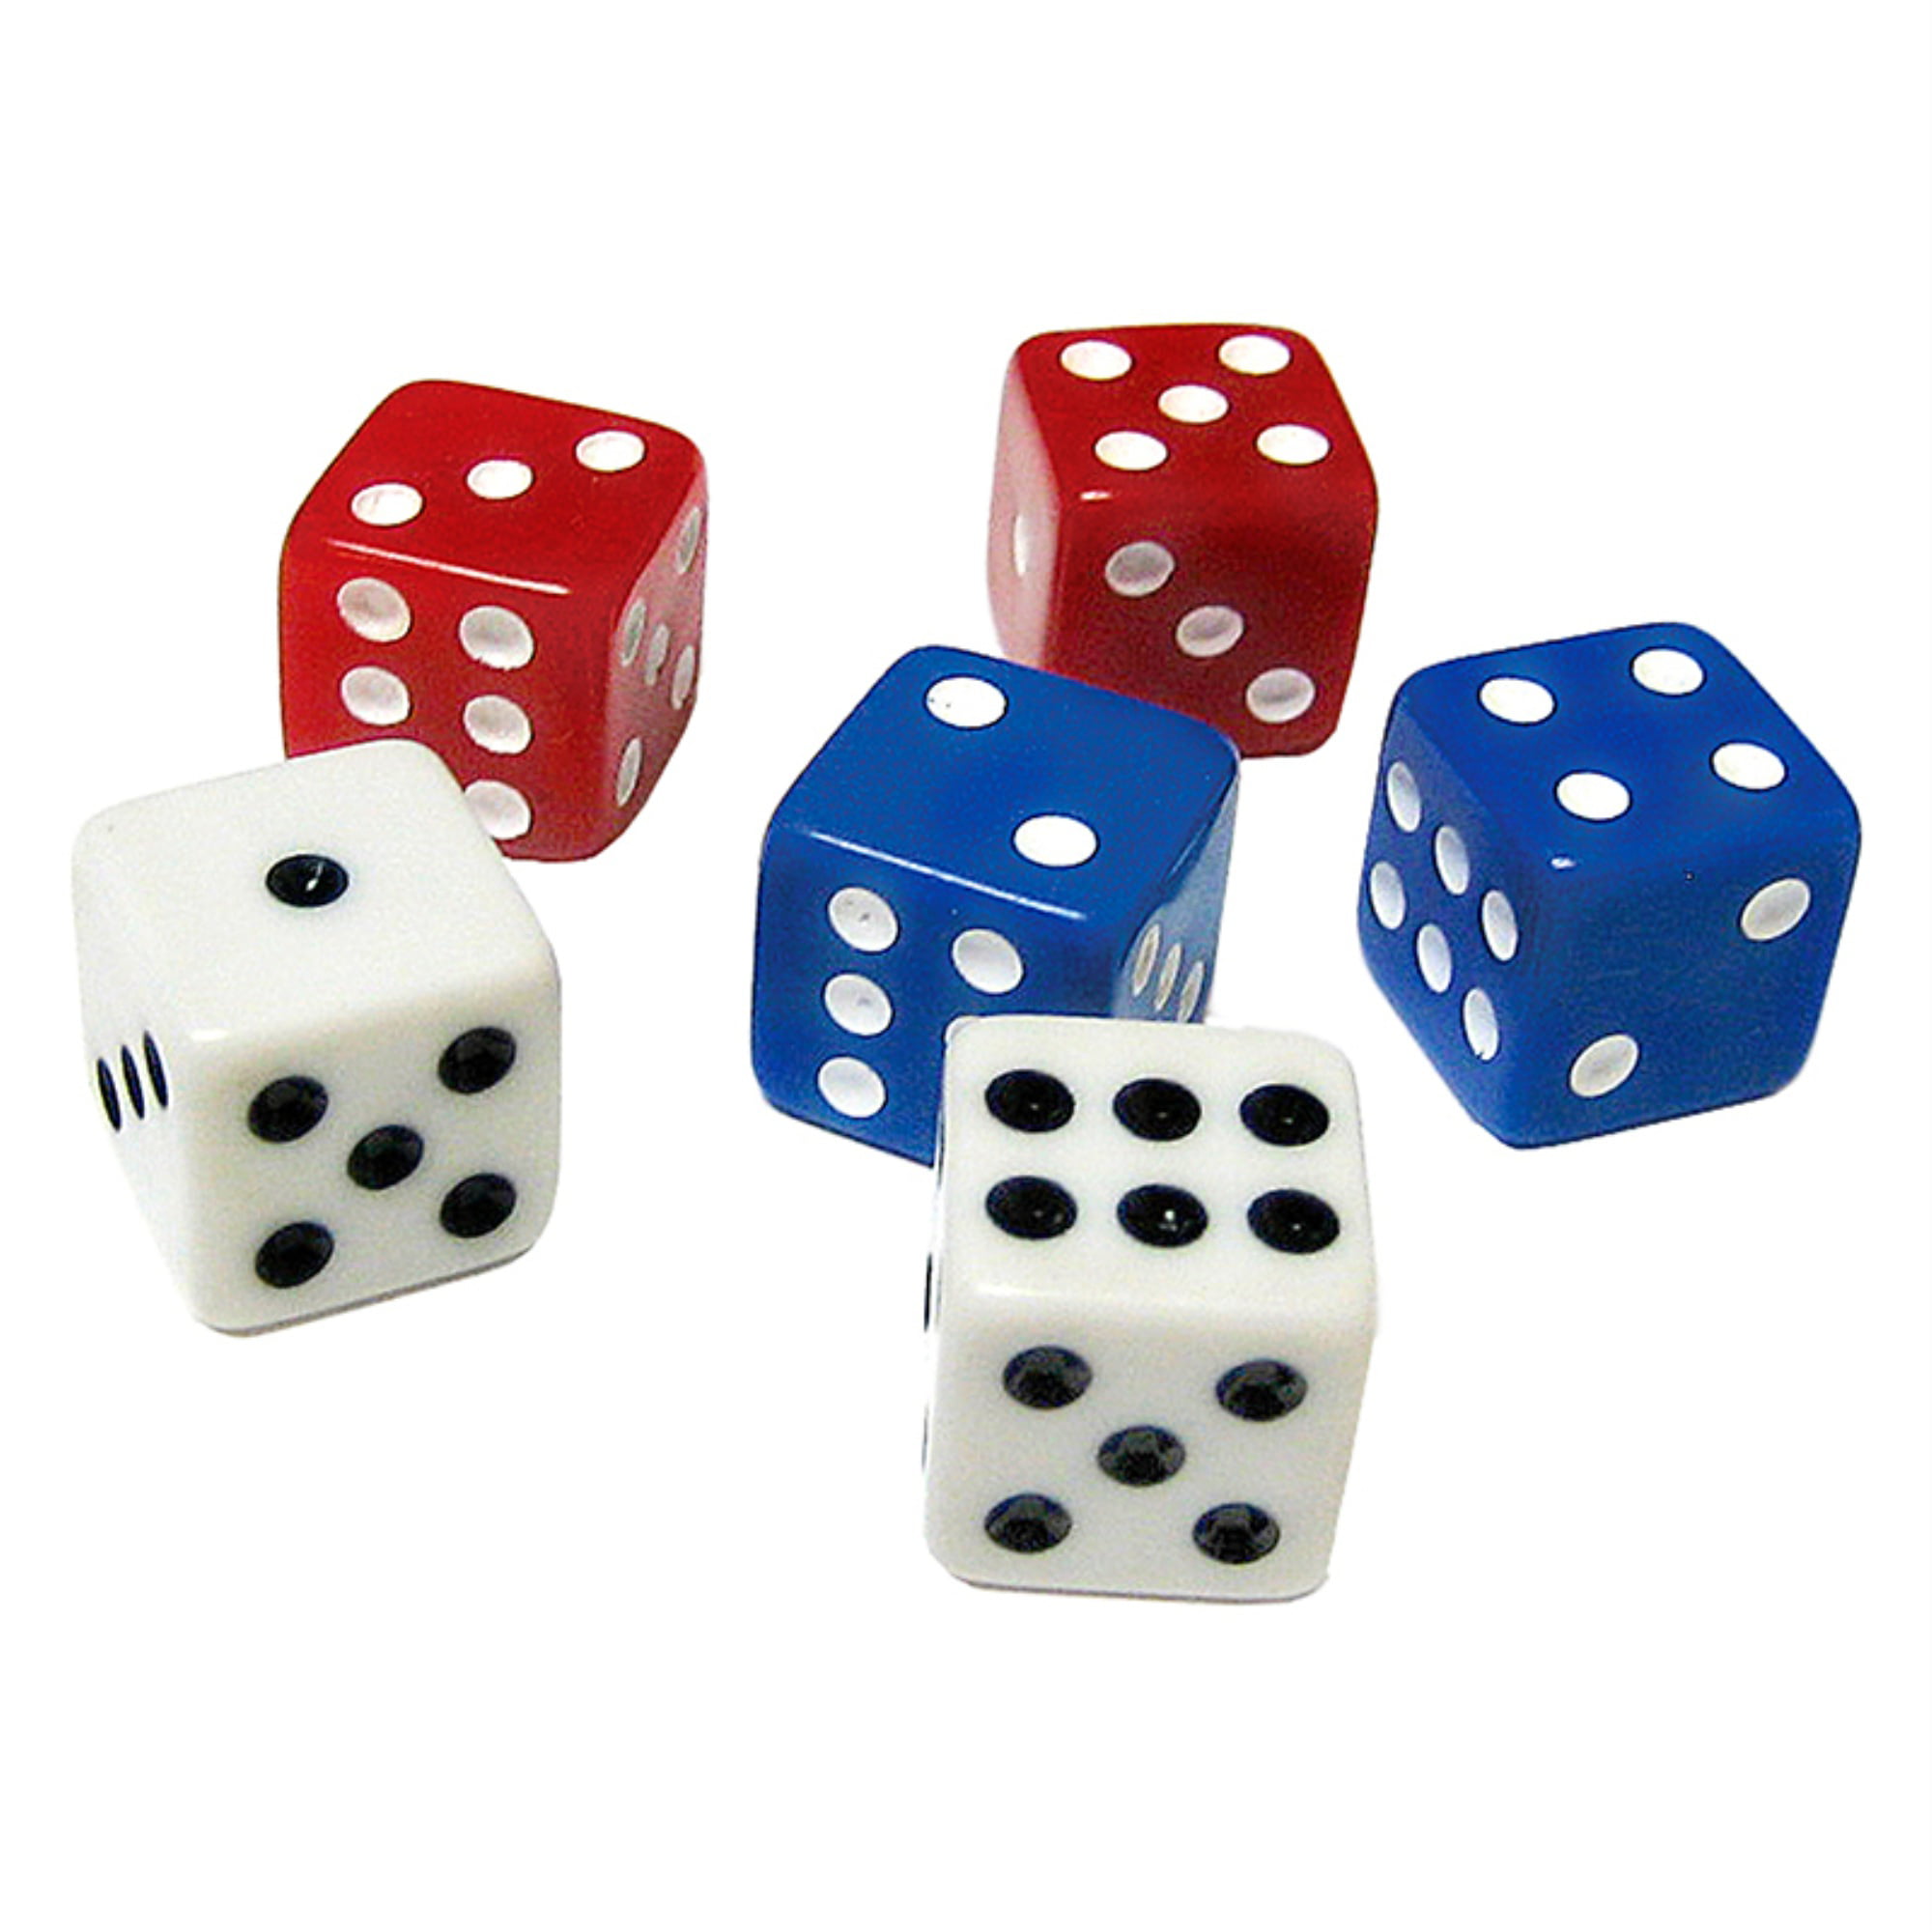 NEW 18 ASSORTED OPAQUE DICE 16MM RED WHITE AND BLUE 3 COLORS 6 OF EACH COLOR 